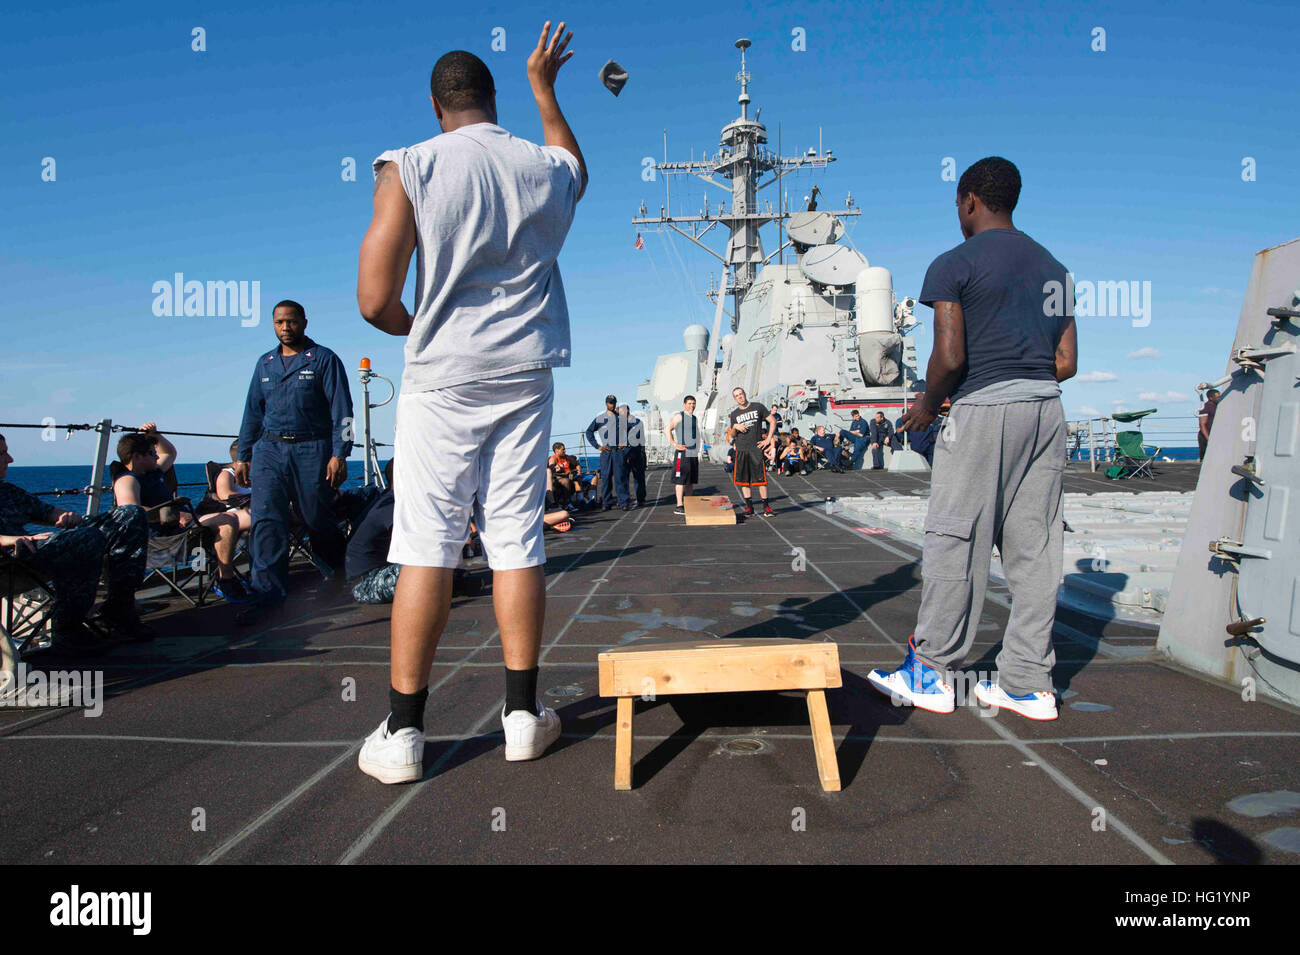 U.S. Sailors play a game of corn hole during a steel beach picnic May 26, 2014, aboard the guided missile destroyer USS Jason Dunham (DDG 109) in the Atlantic Ocean. (U.S. Navy photo by Mass Communication Specialist 3rd Class Derek Paumen/Released) USS Jason Dunham 140526-N-NK134-508 Stock Photo